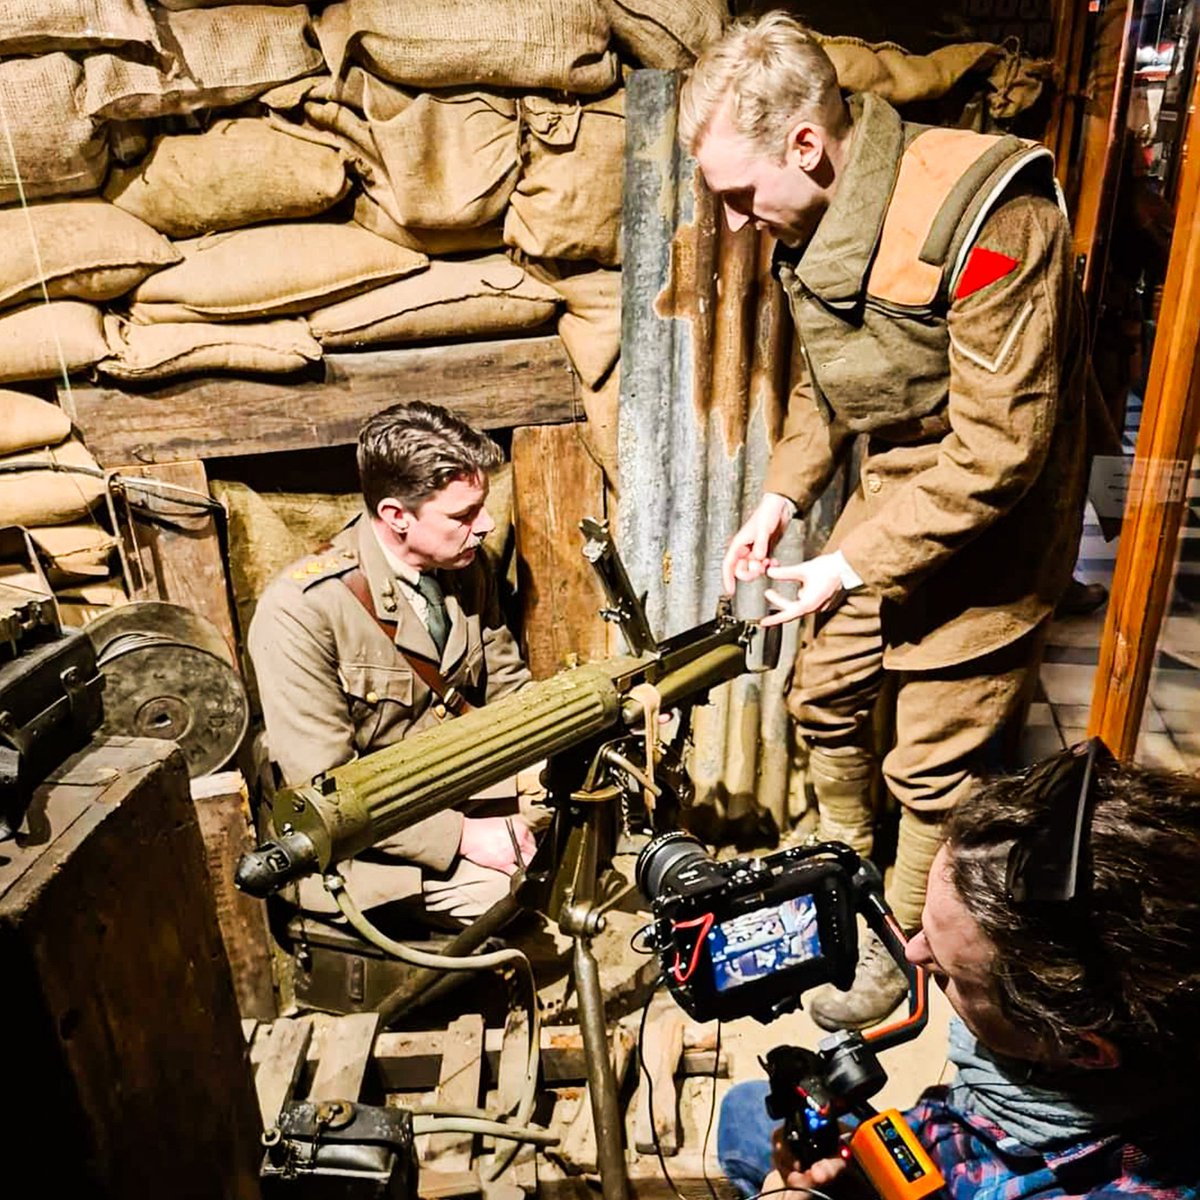 Could You Survive as a British Soldier in the First World War? Beyond excited to share my latest video, out today at 6PM GMT on the @HistoryHit YouTube channel! We cover recruitment, pals battalions, equipment, rations, trench foot, medicine and plastic surgery. Don't miss it!